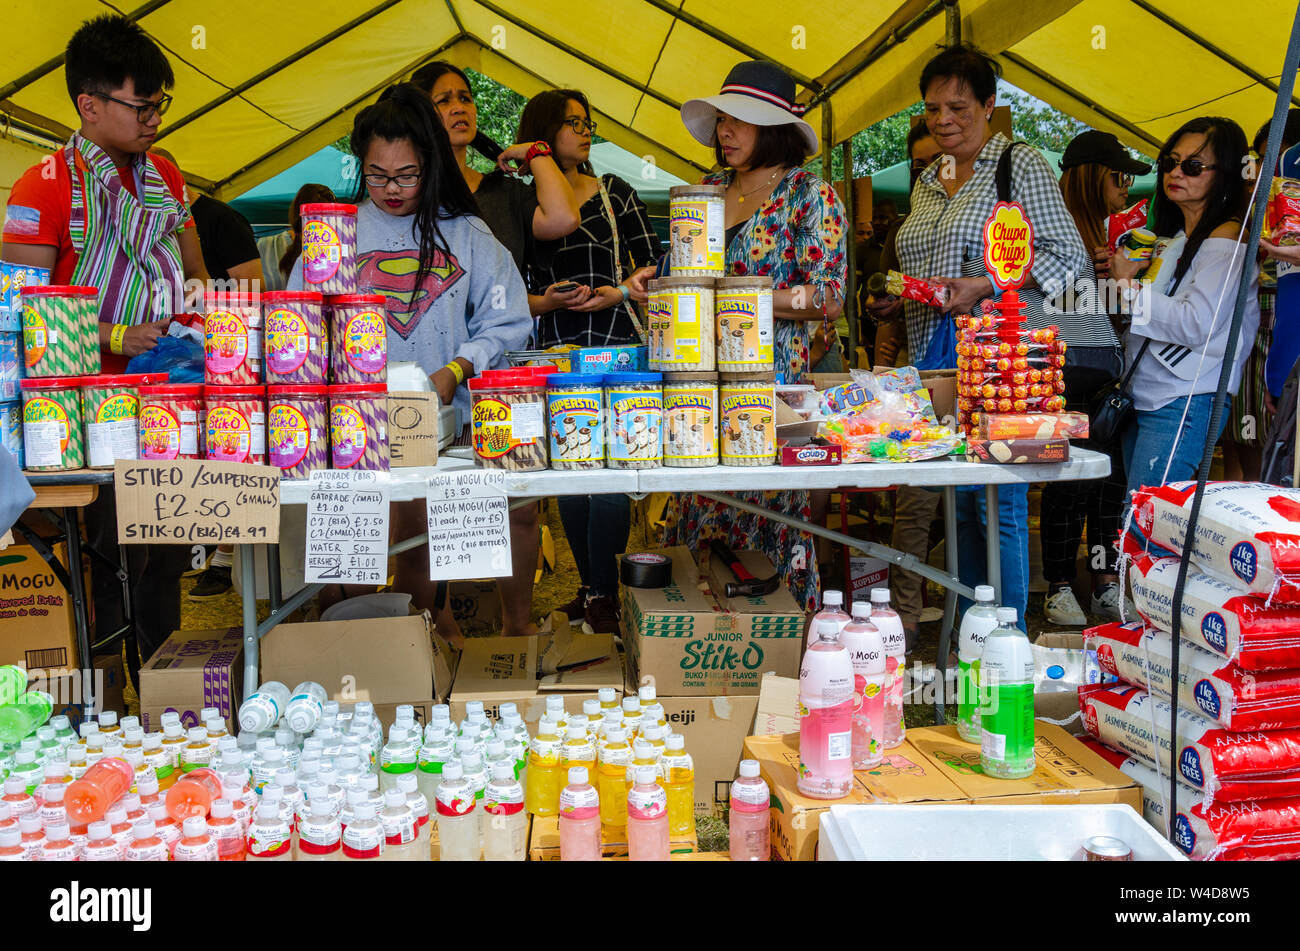 A Filipio food and drink stall at a Filipino cultural event in London sells mogo mogo drinks and stiko biscuits. Stock Photo